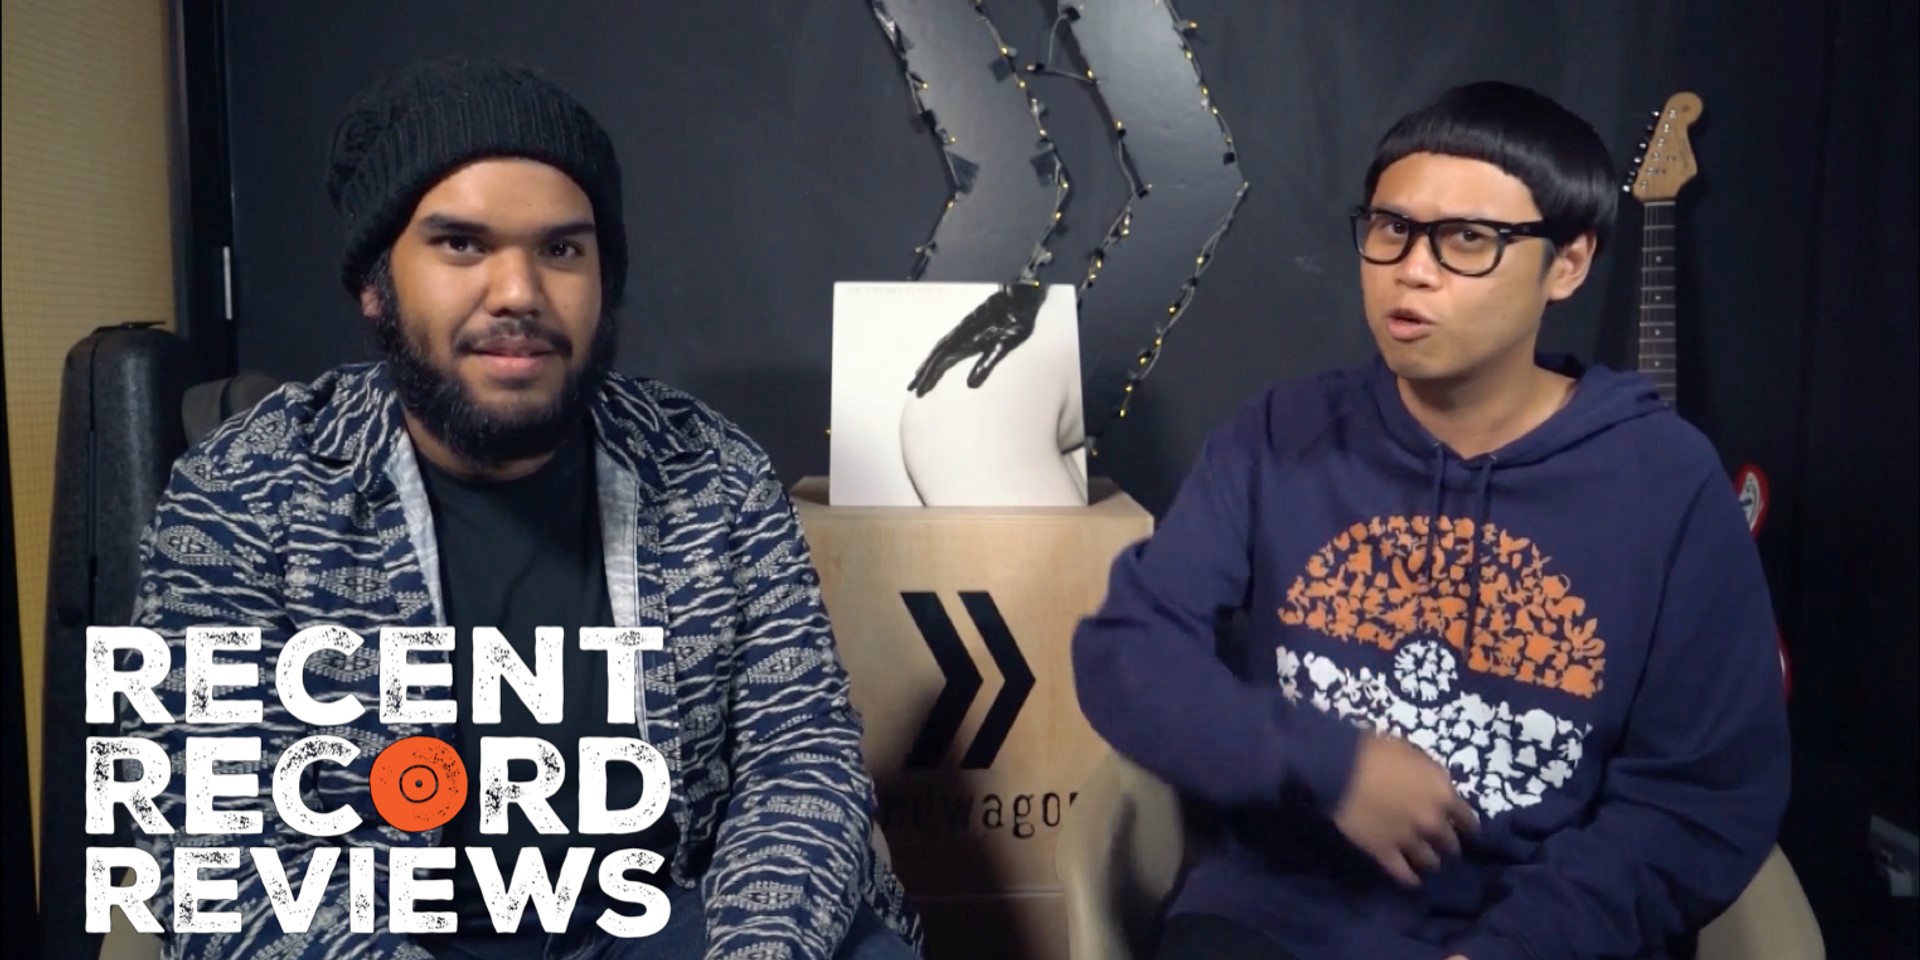 WATCH: Bandwagon Recent Record Reviews #008 - Anomy, Hinds, Villagers